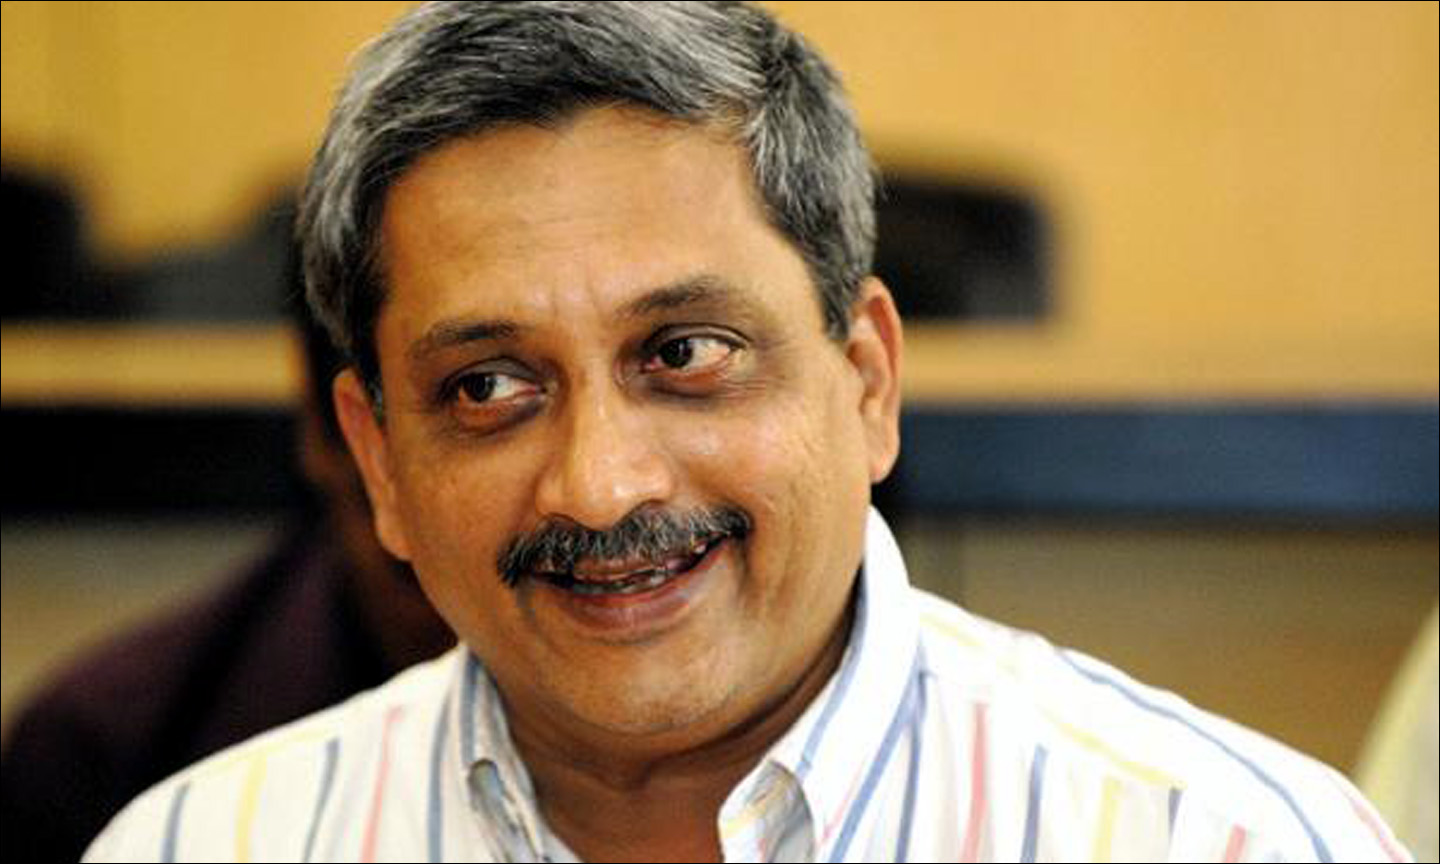 Opposition slams Parrikar’s ‘irresponsible’ comments on ‘No First Use’